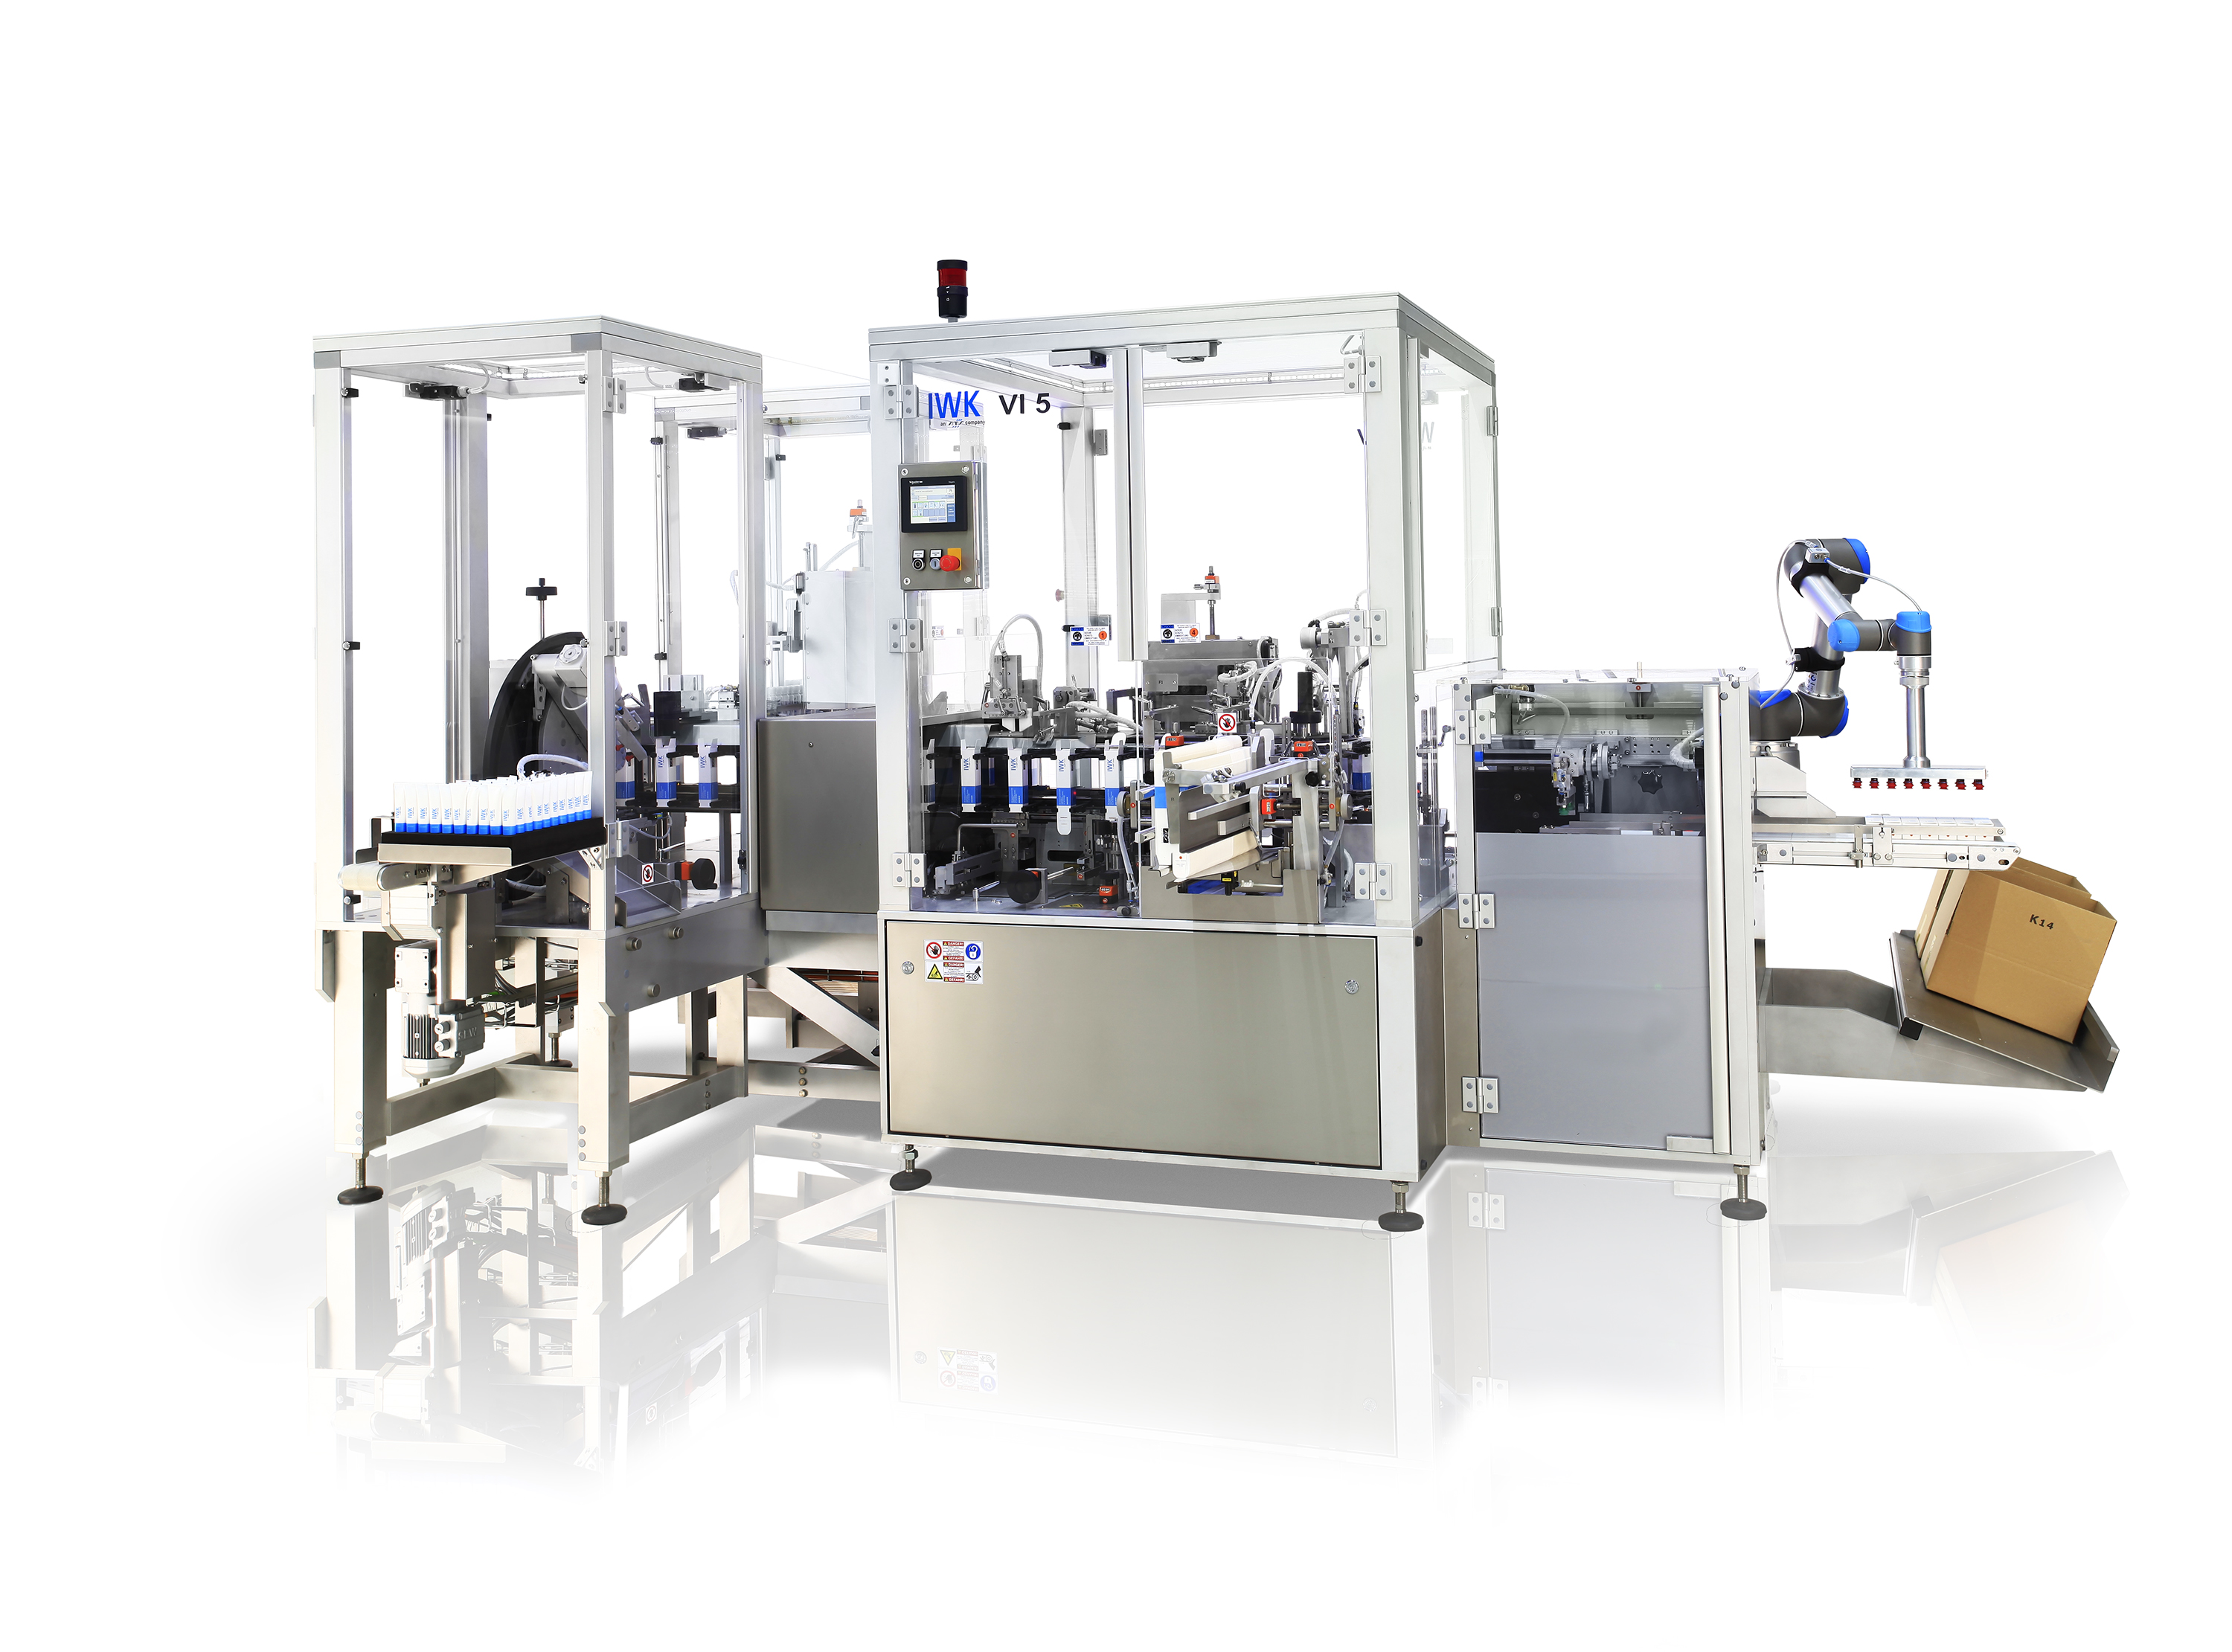 IWK Introduces Two Cost-Effective, Versatile Vertical Cartoners for Pharma & Personal Care Applications     